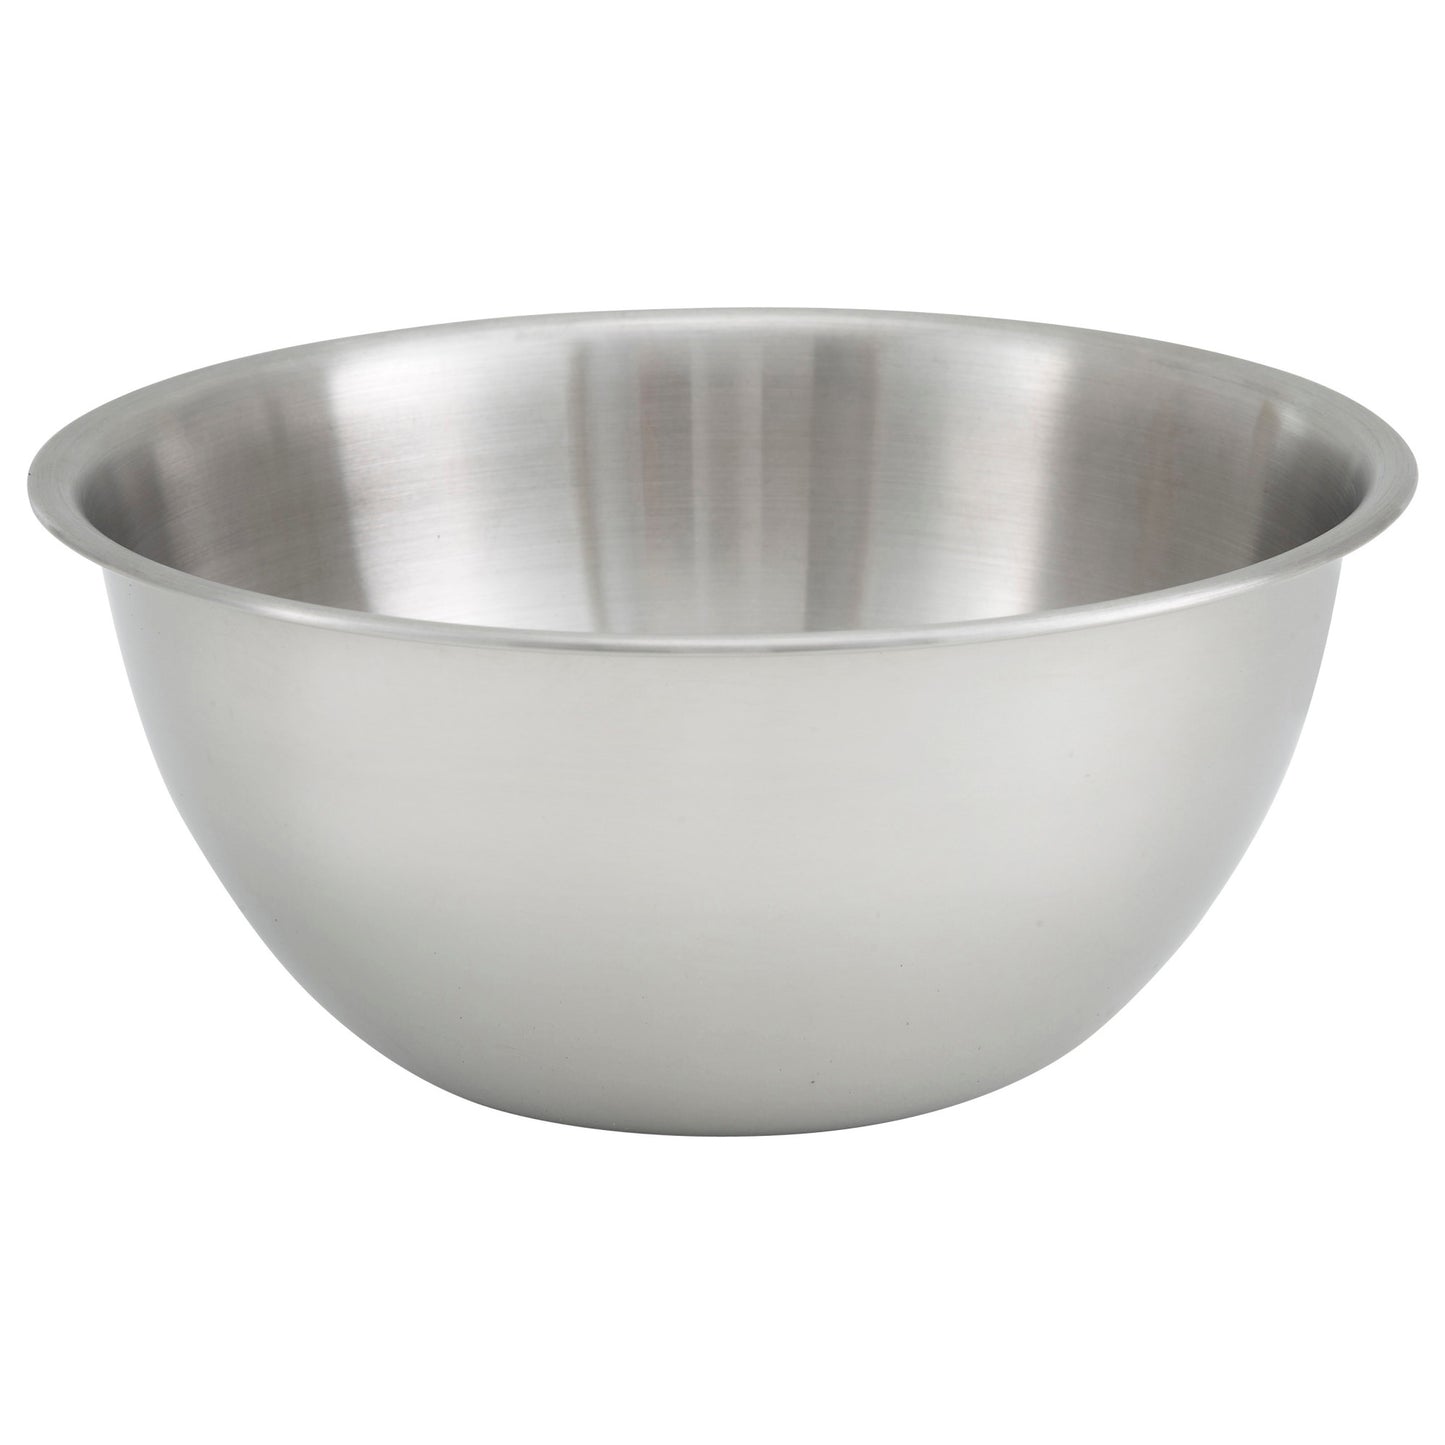 Mixing Bowl, Deep, Heavy-Duty Stainless Steel, 0.6 mm - 8 Quart